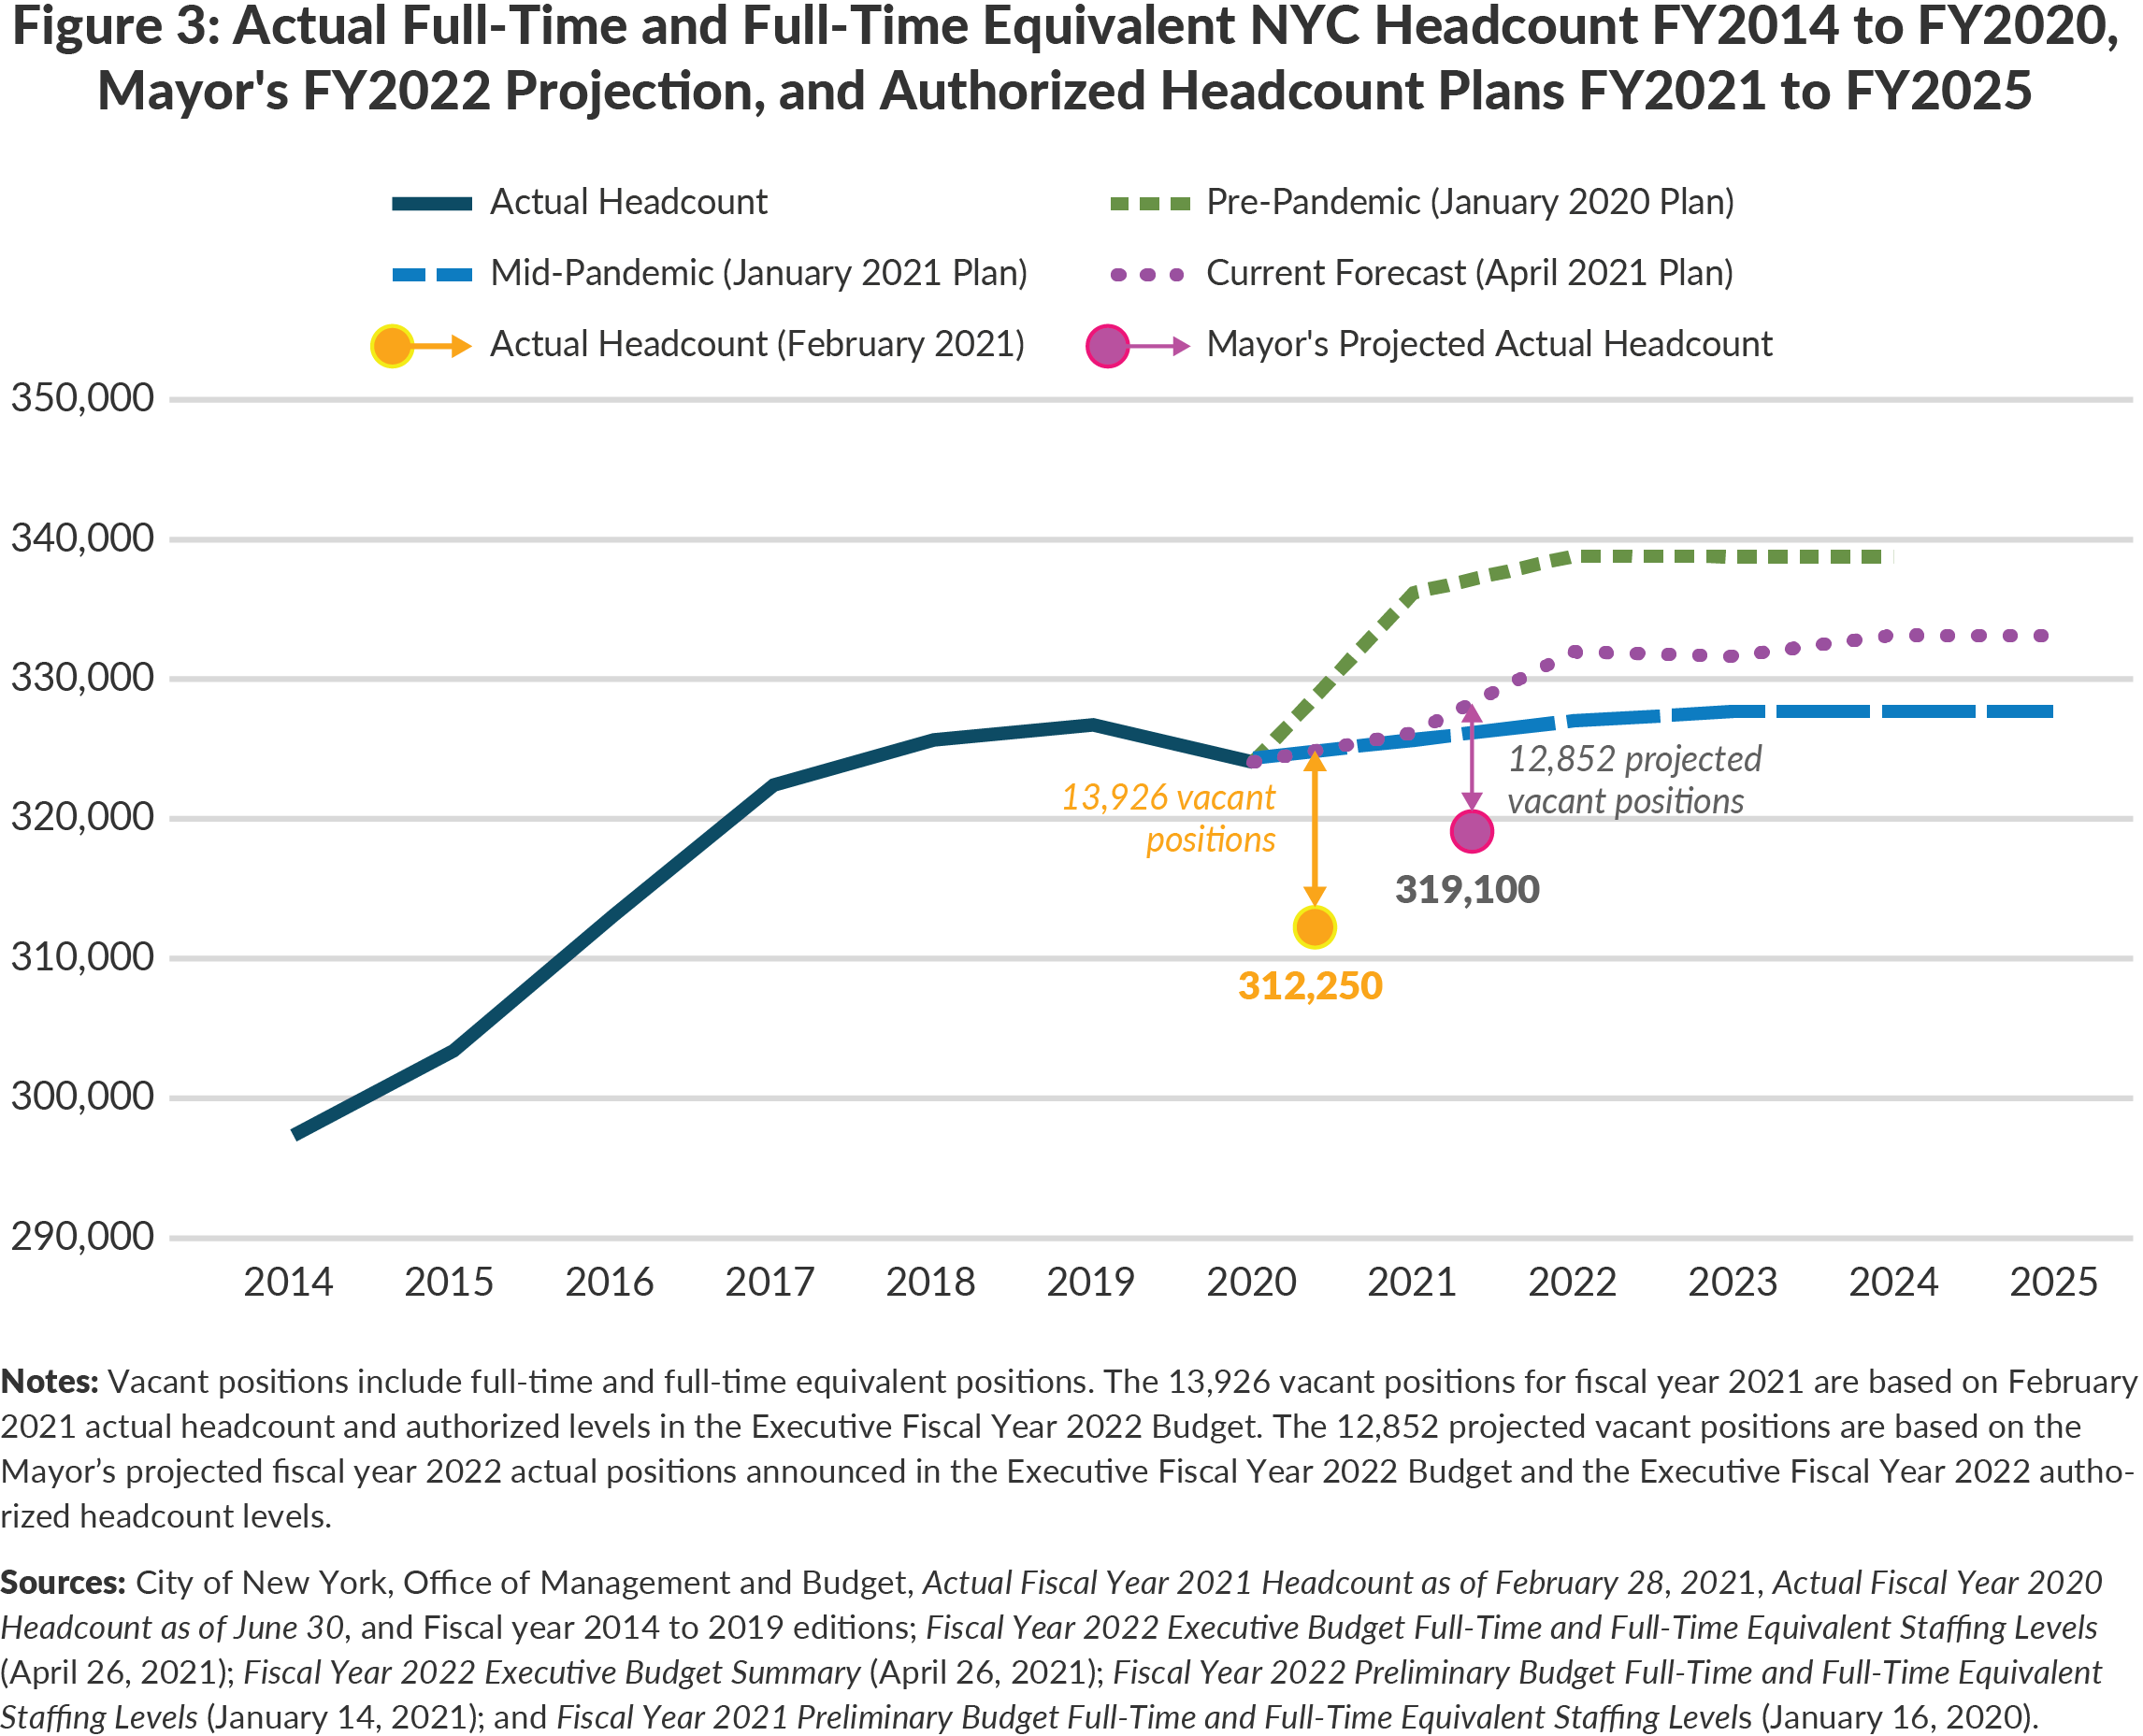 Figure 3. Actual Full-Time and Full-Time Equivalent NYC Headcount FY2014 to FY2020, Mayor's FY2022 Projection, and Authorized Headcount Plans FY2021 to FY2025